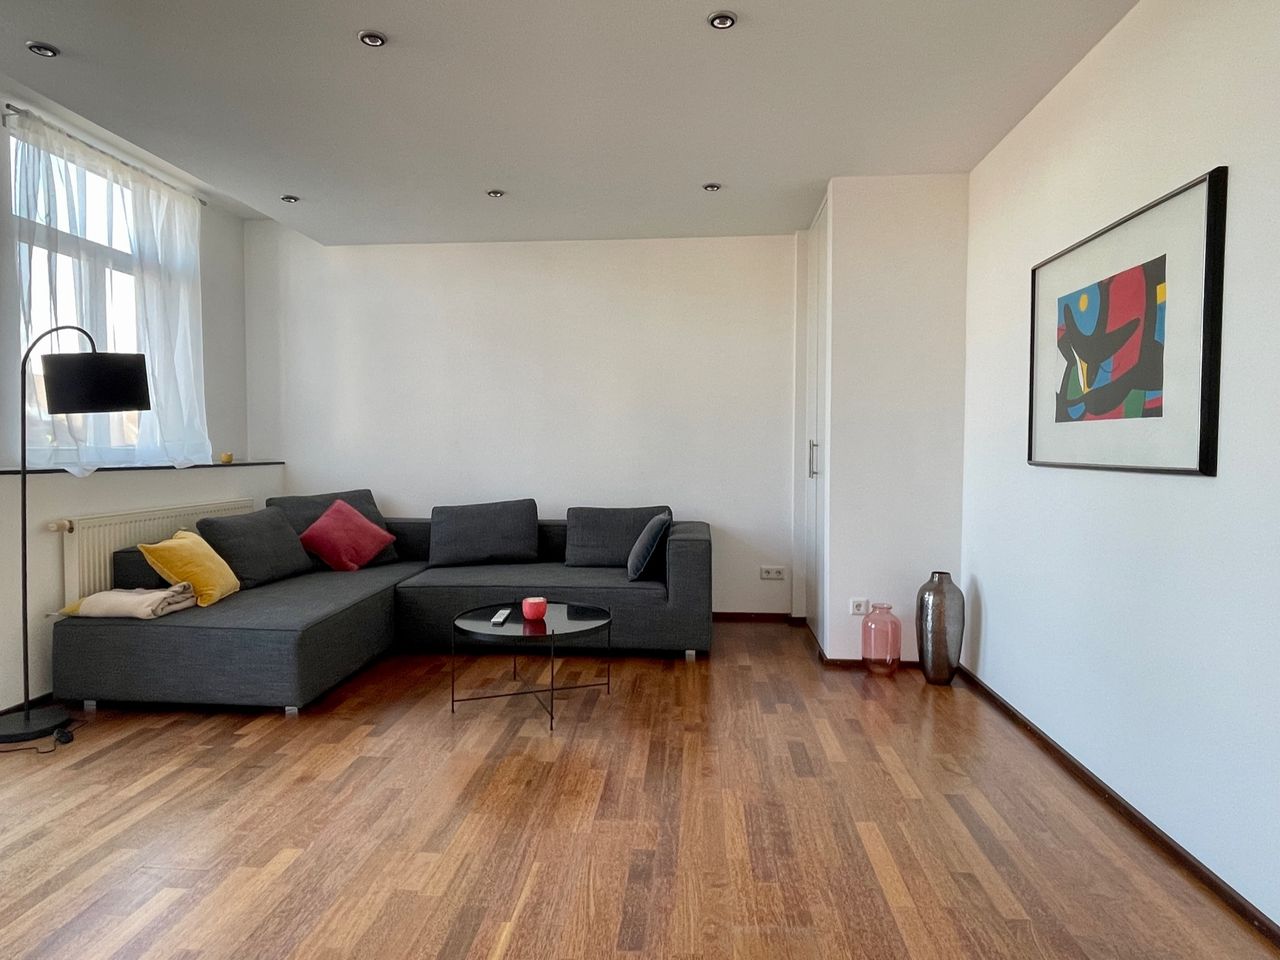 Large and bright maisonette apartment in best location (Cologne)